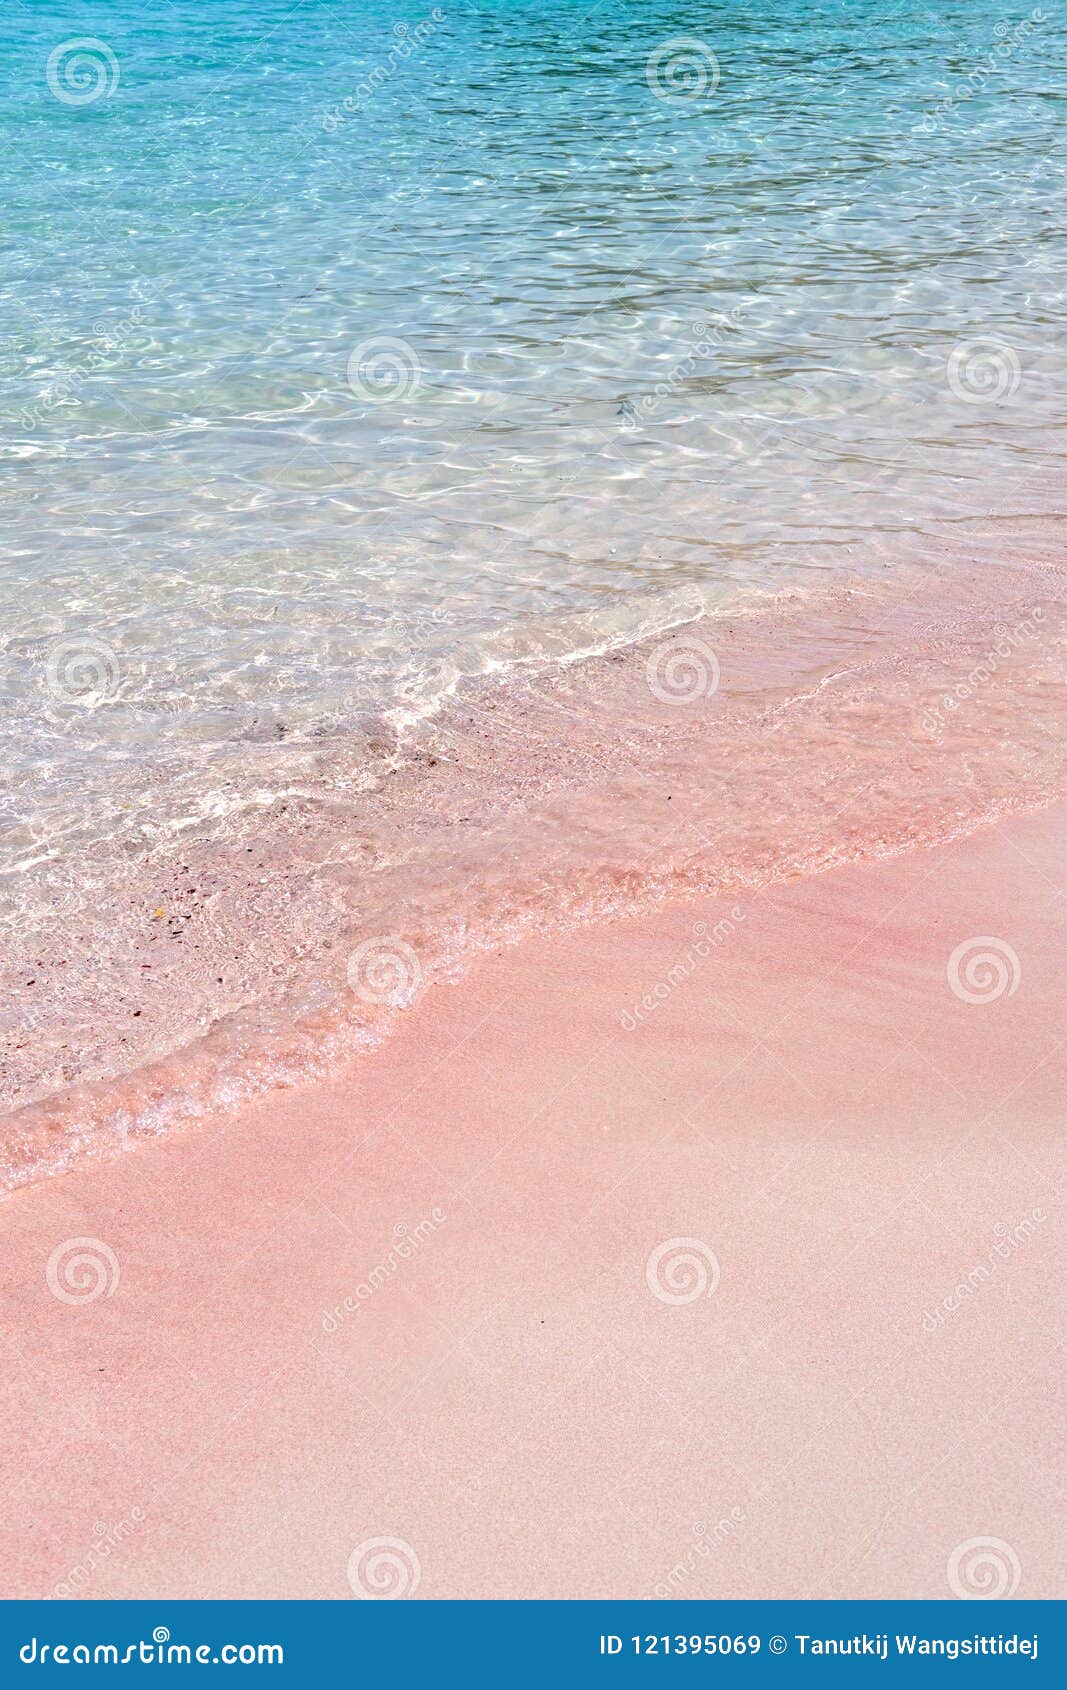 a beautiful pink beach and blue clear water from komodo island komodo national park, labuan bajo, flores, indonesia